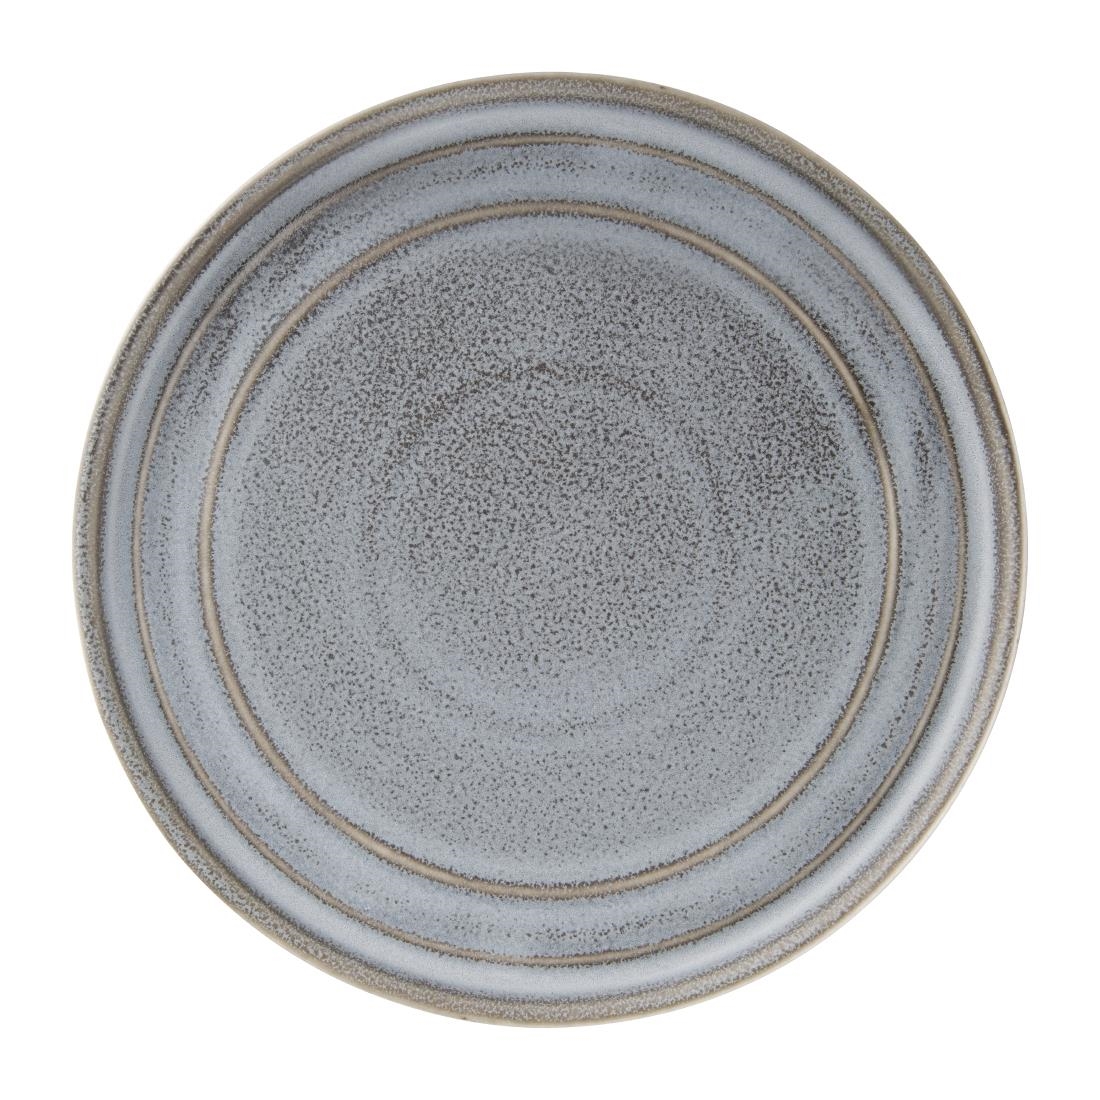 Olympia Cavolo Charcoal Dusk Flat Round Plates 220mm (Pack of 6)